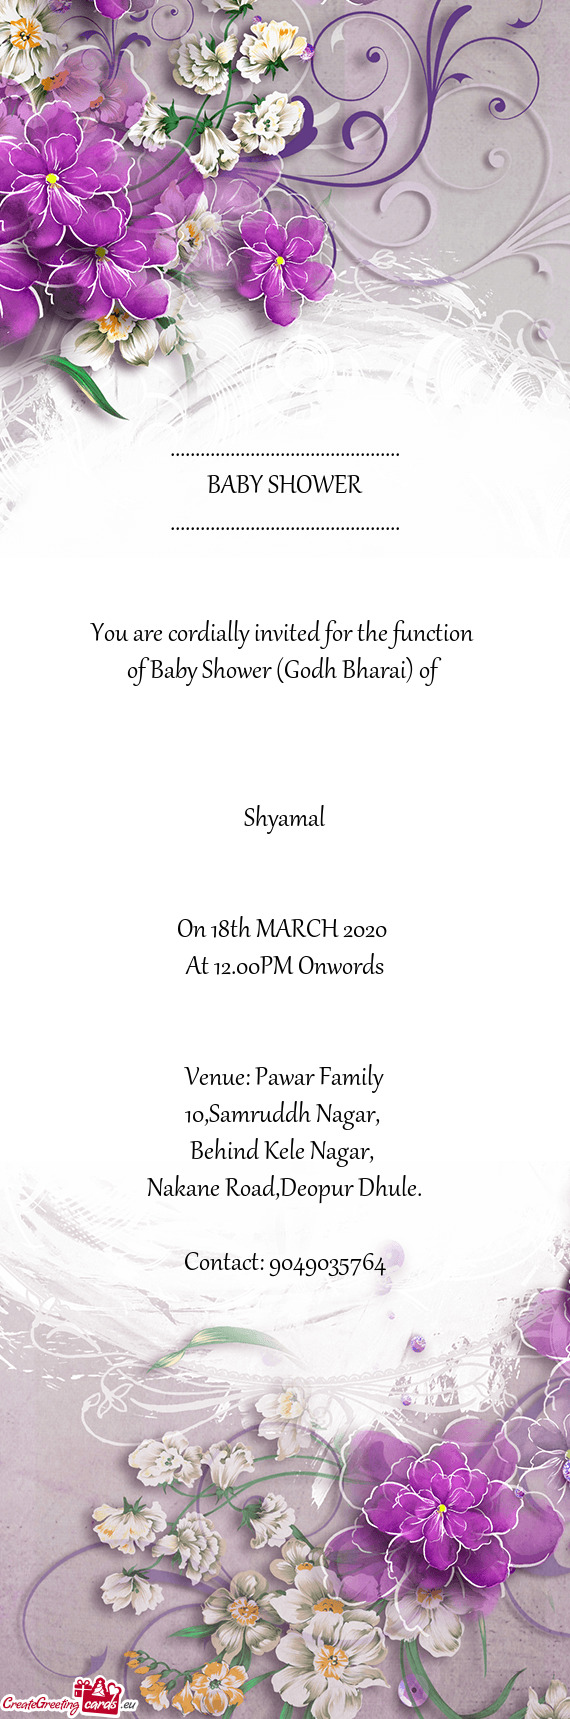 You are cordially invited for the function